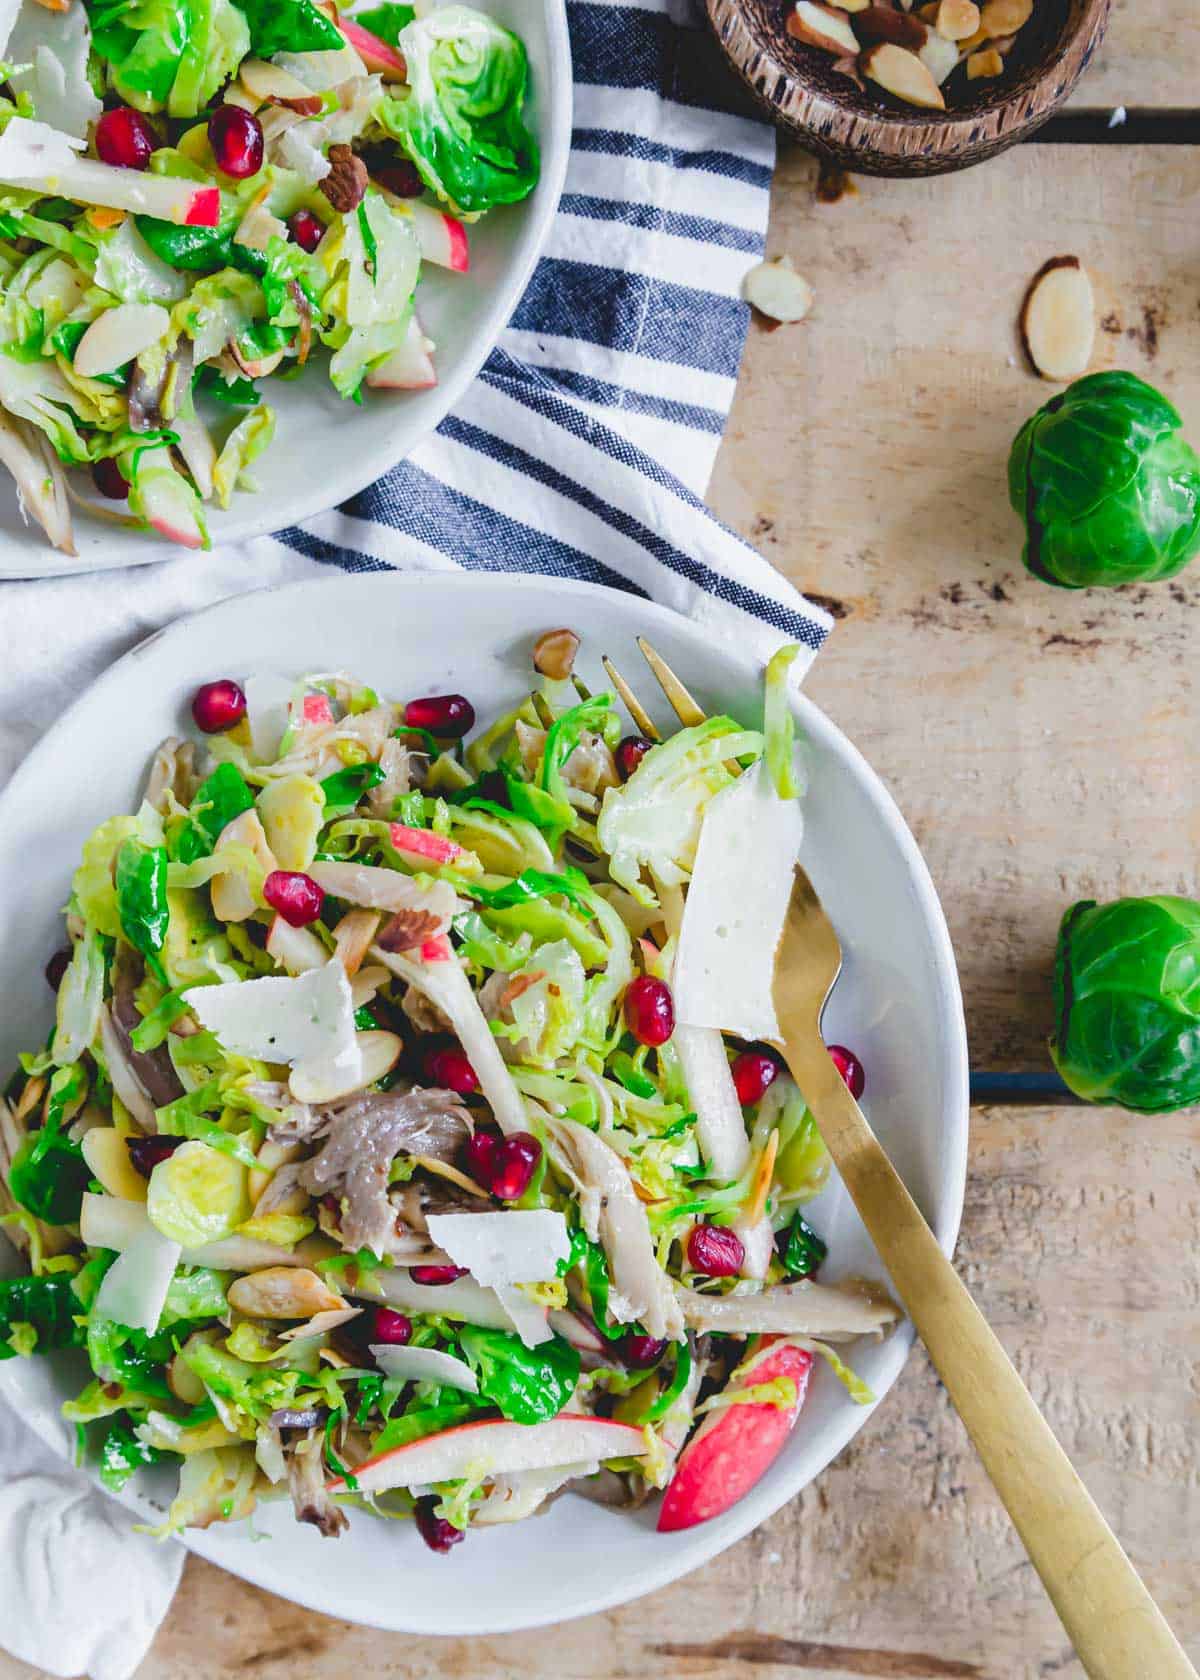 Shredded chicken and Brussels sprouts salad recipe with apples and pomegranates tossed in a honey mustard dressing on two white plates.